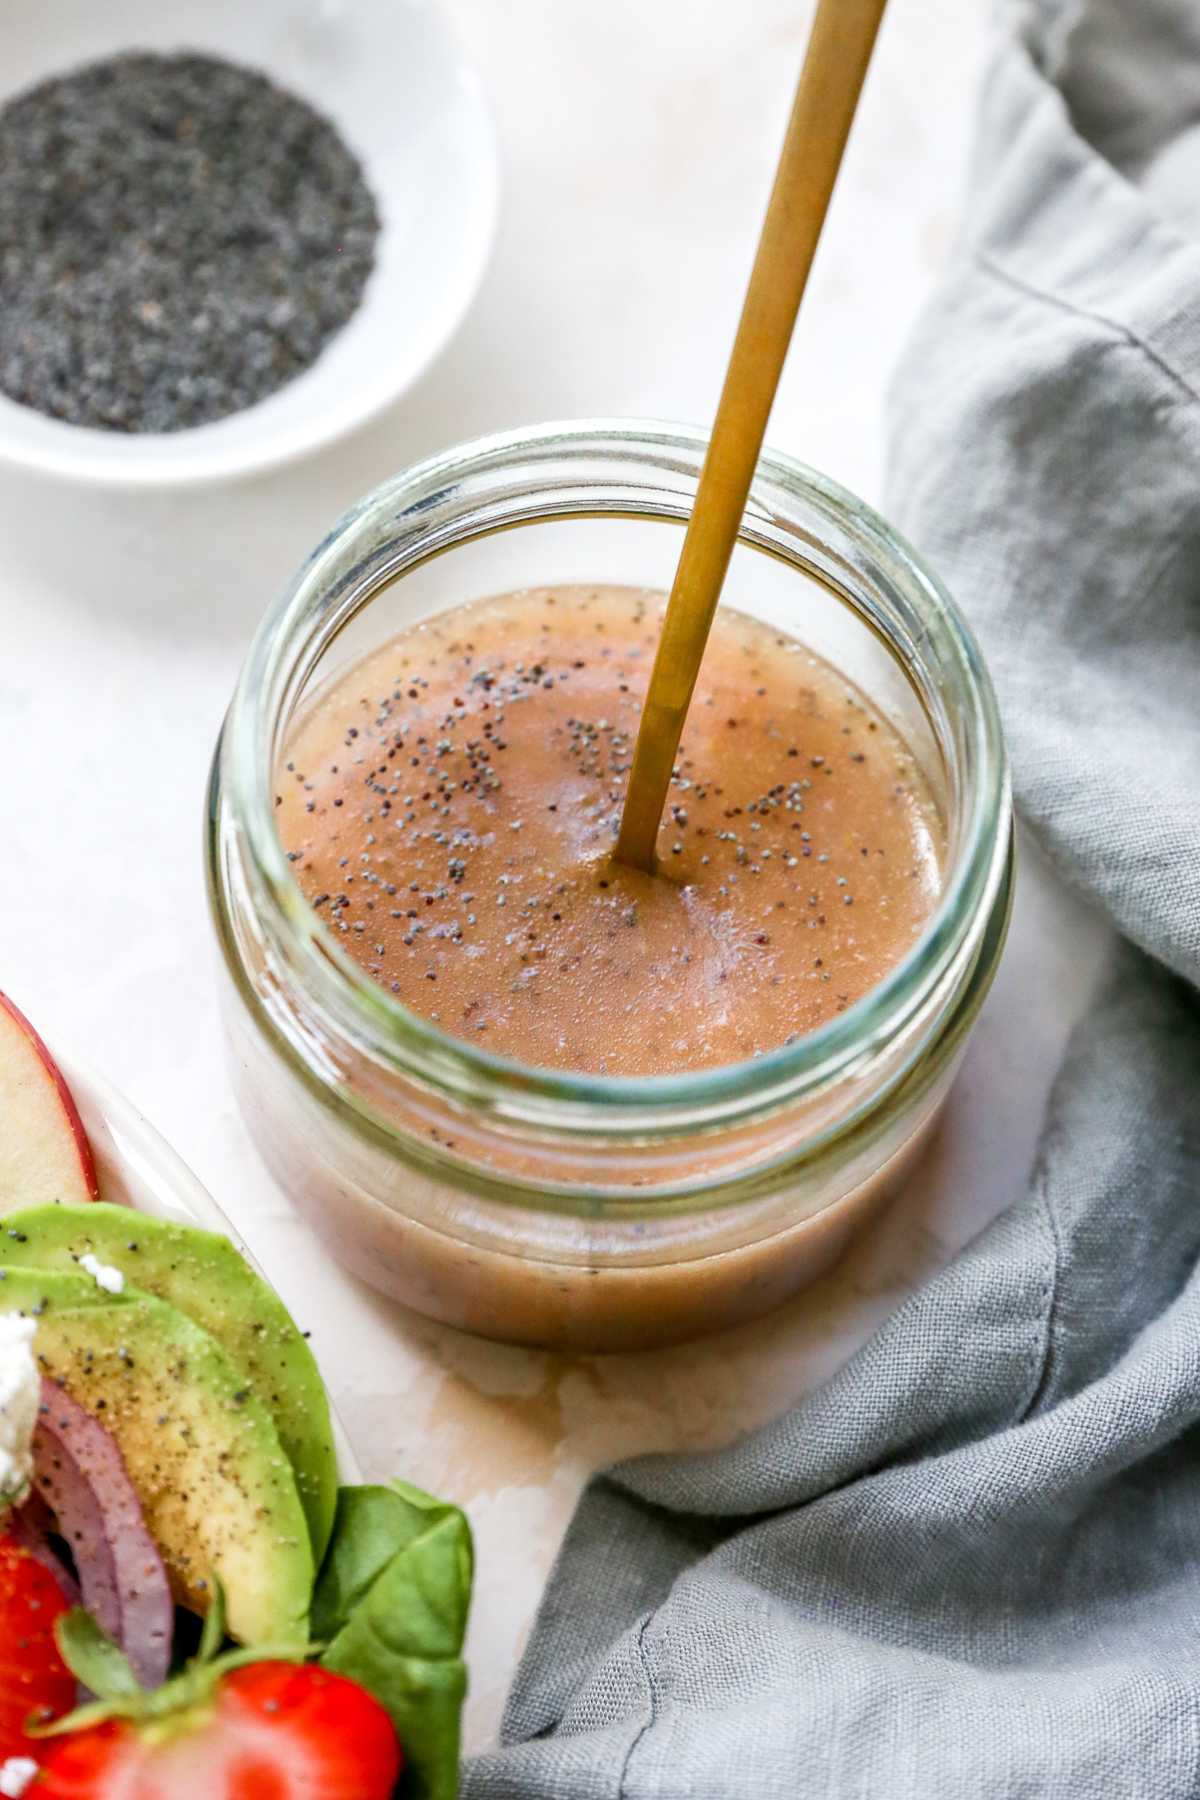 Poppy seed dressing in a jar near a small white bowl of poppy seeds.